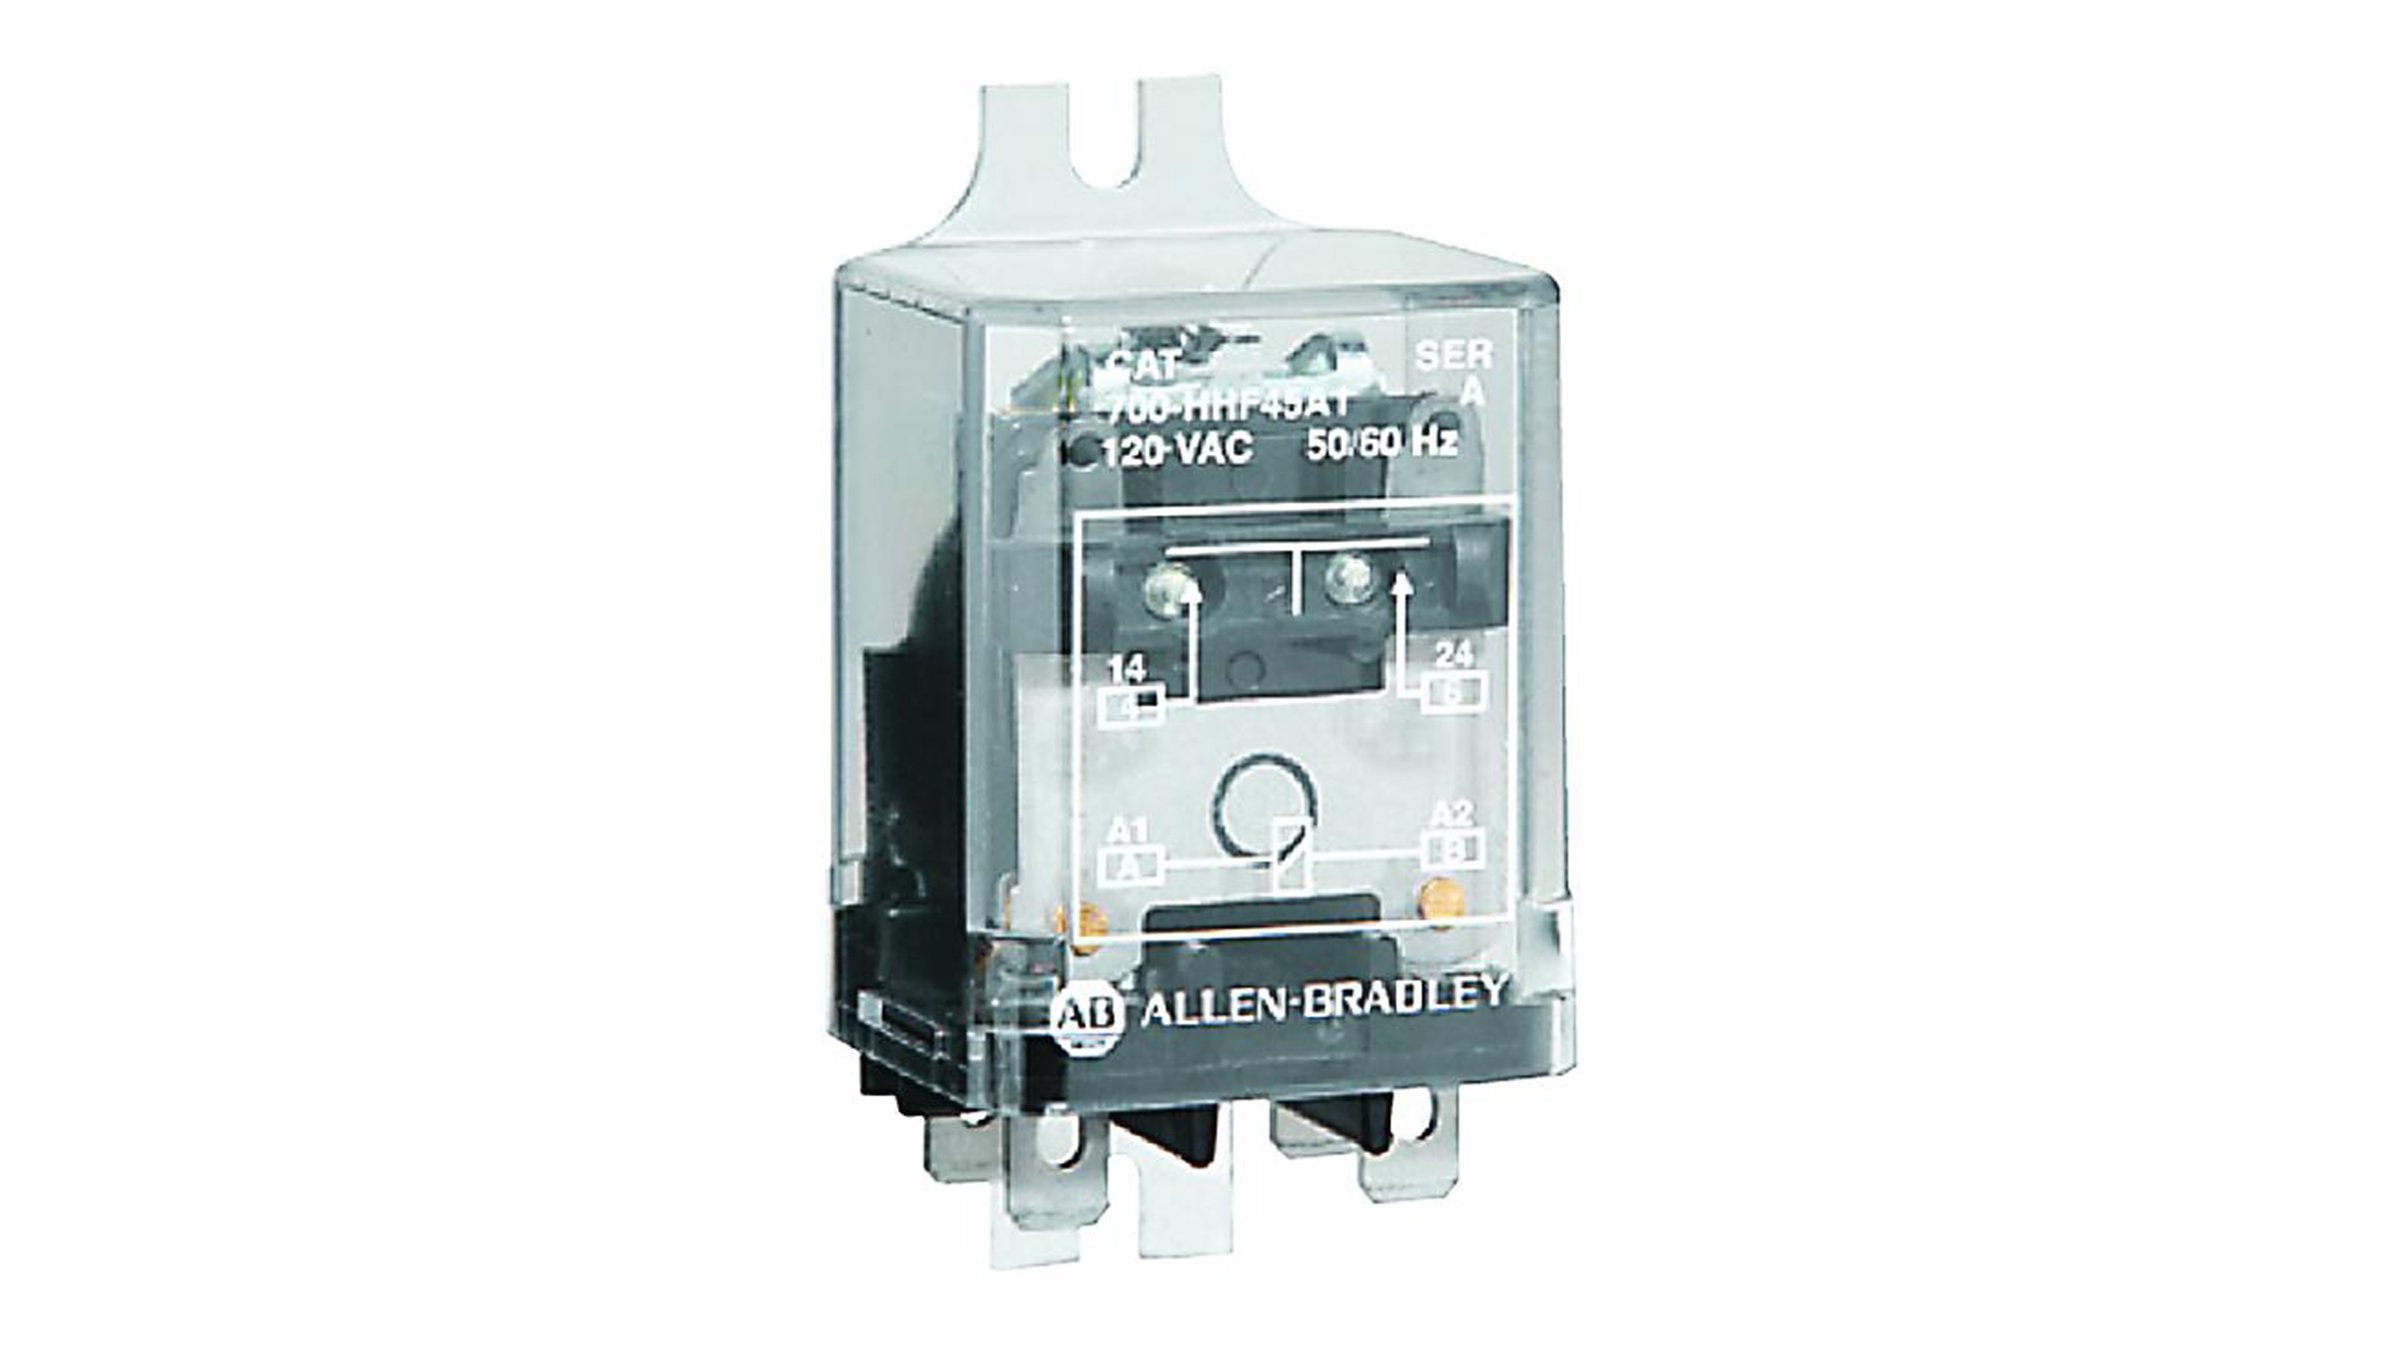 Allen-Bradley Bulletin 700-HHF Flange-Mounted Power Relays are small-sized general purpose relays that switch large loads.